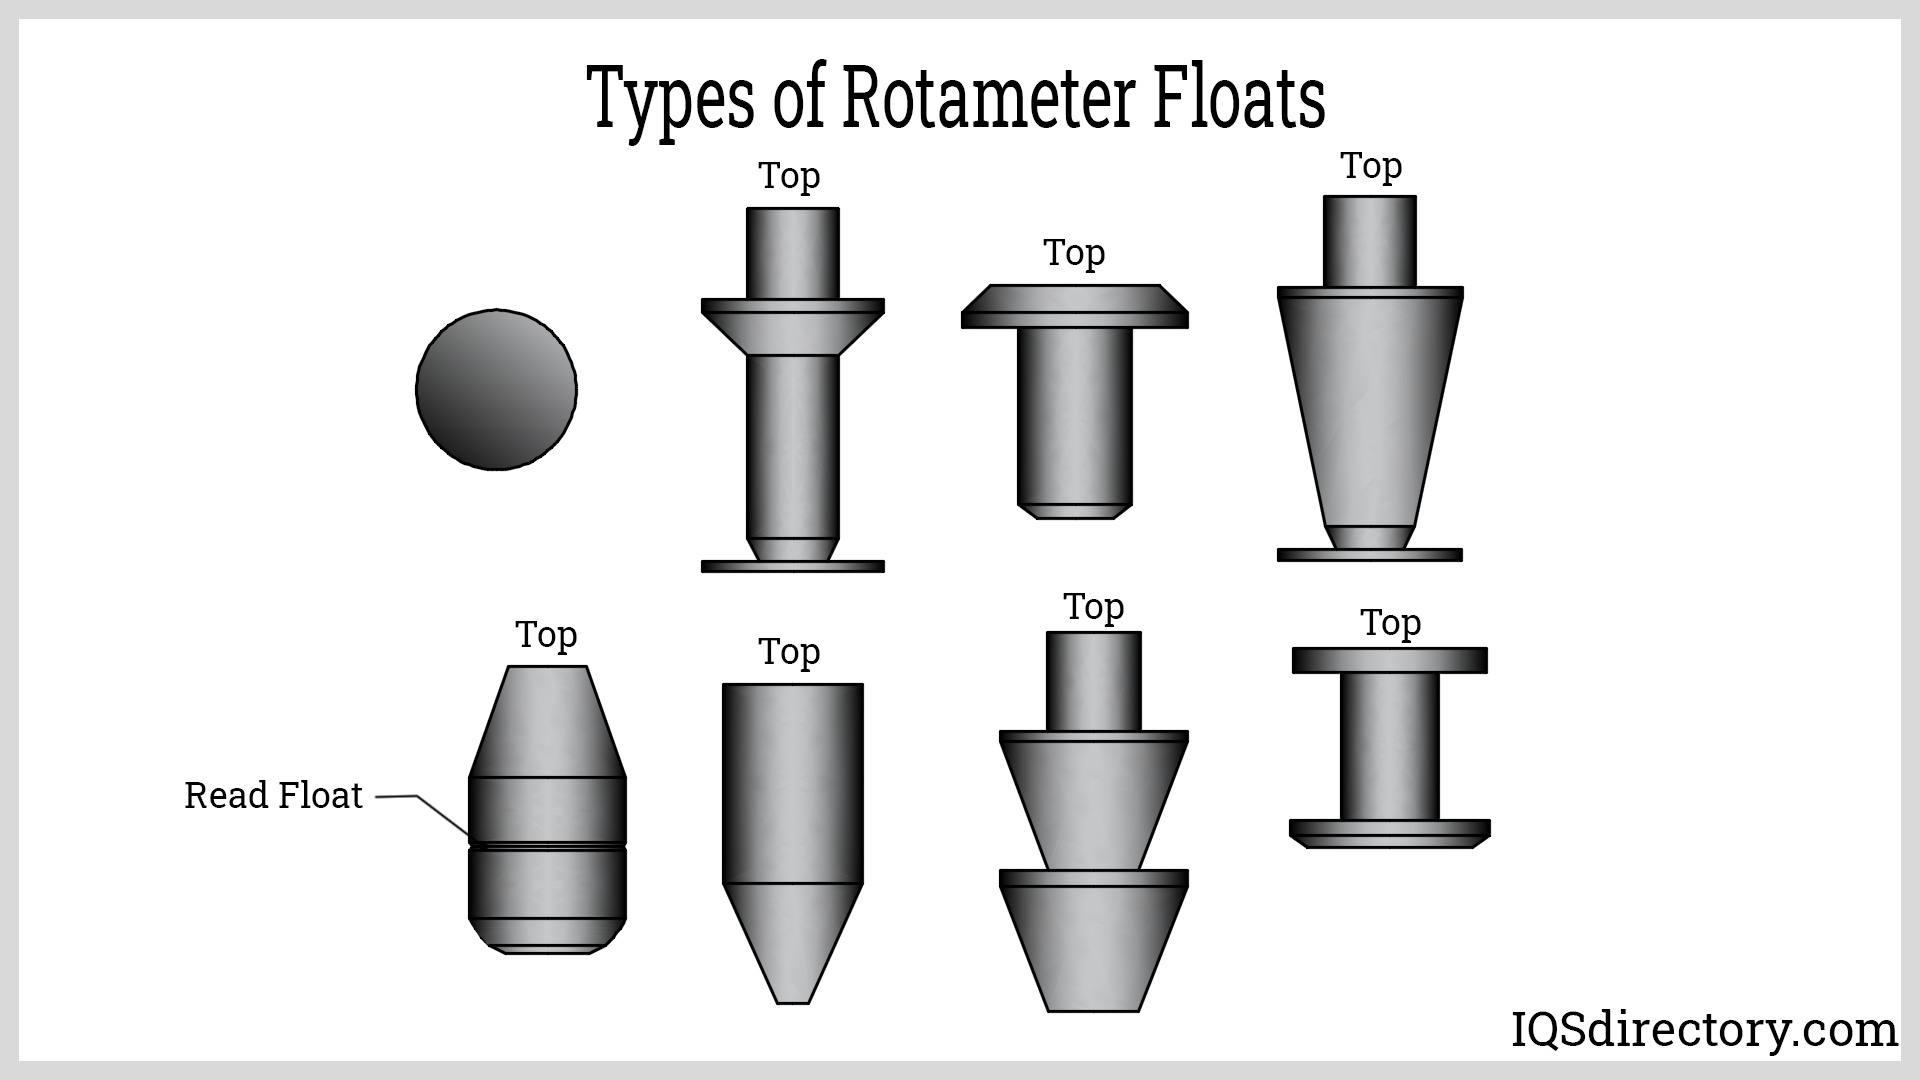 Types of a Rotameter Floats